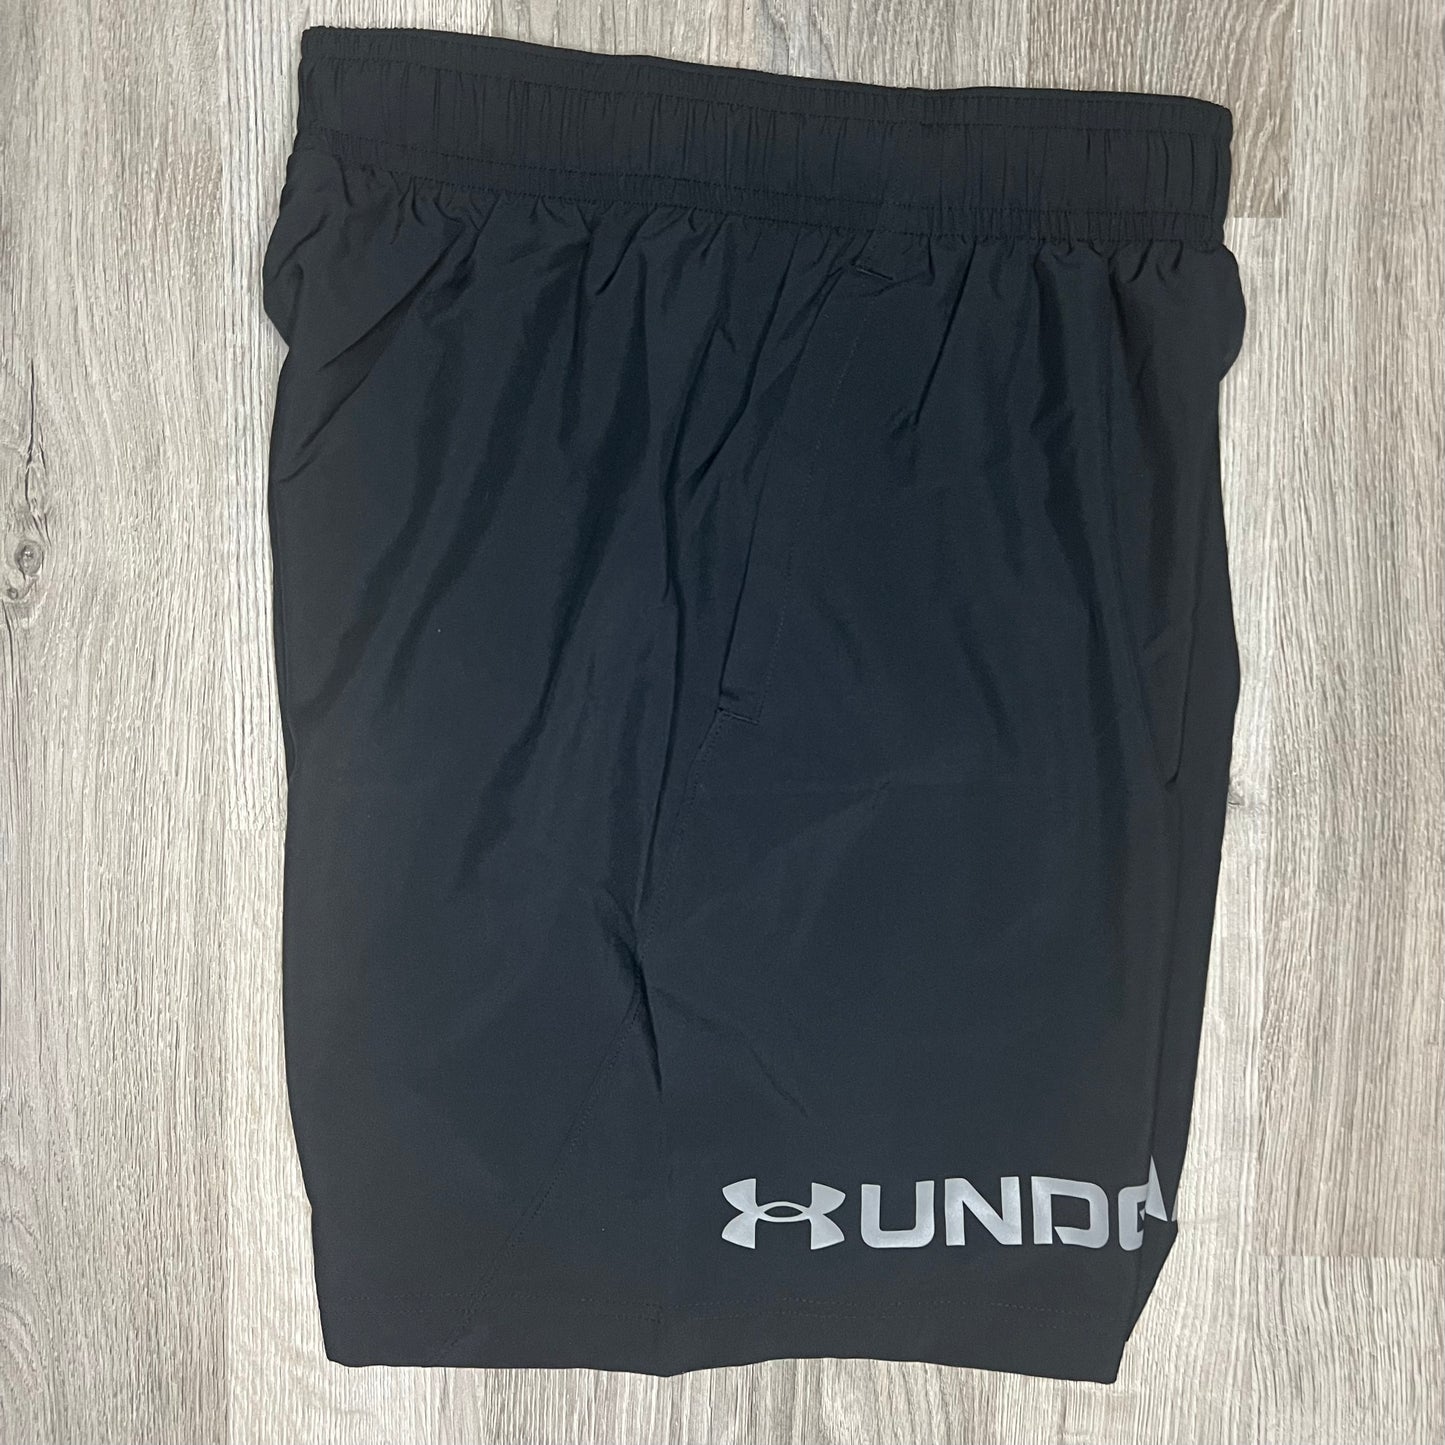 Under Armour Out Run The Storm Woven Shorts